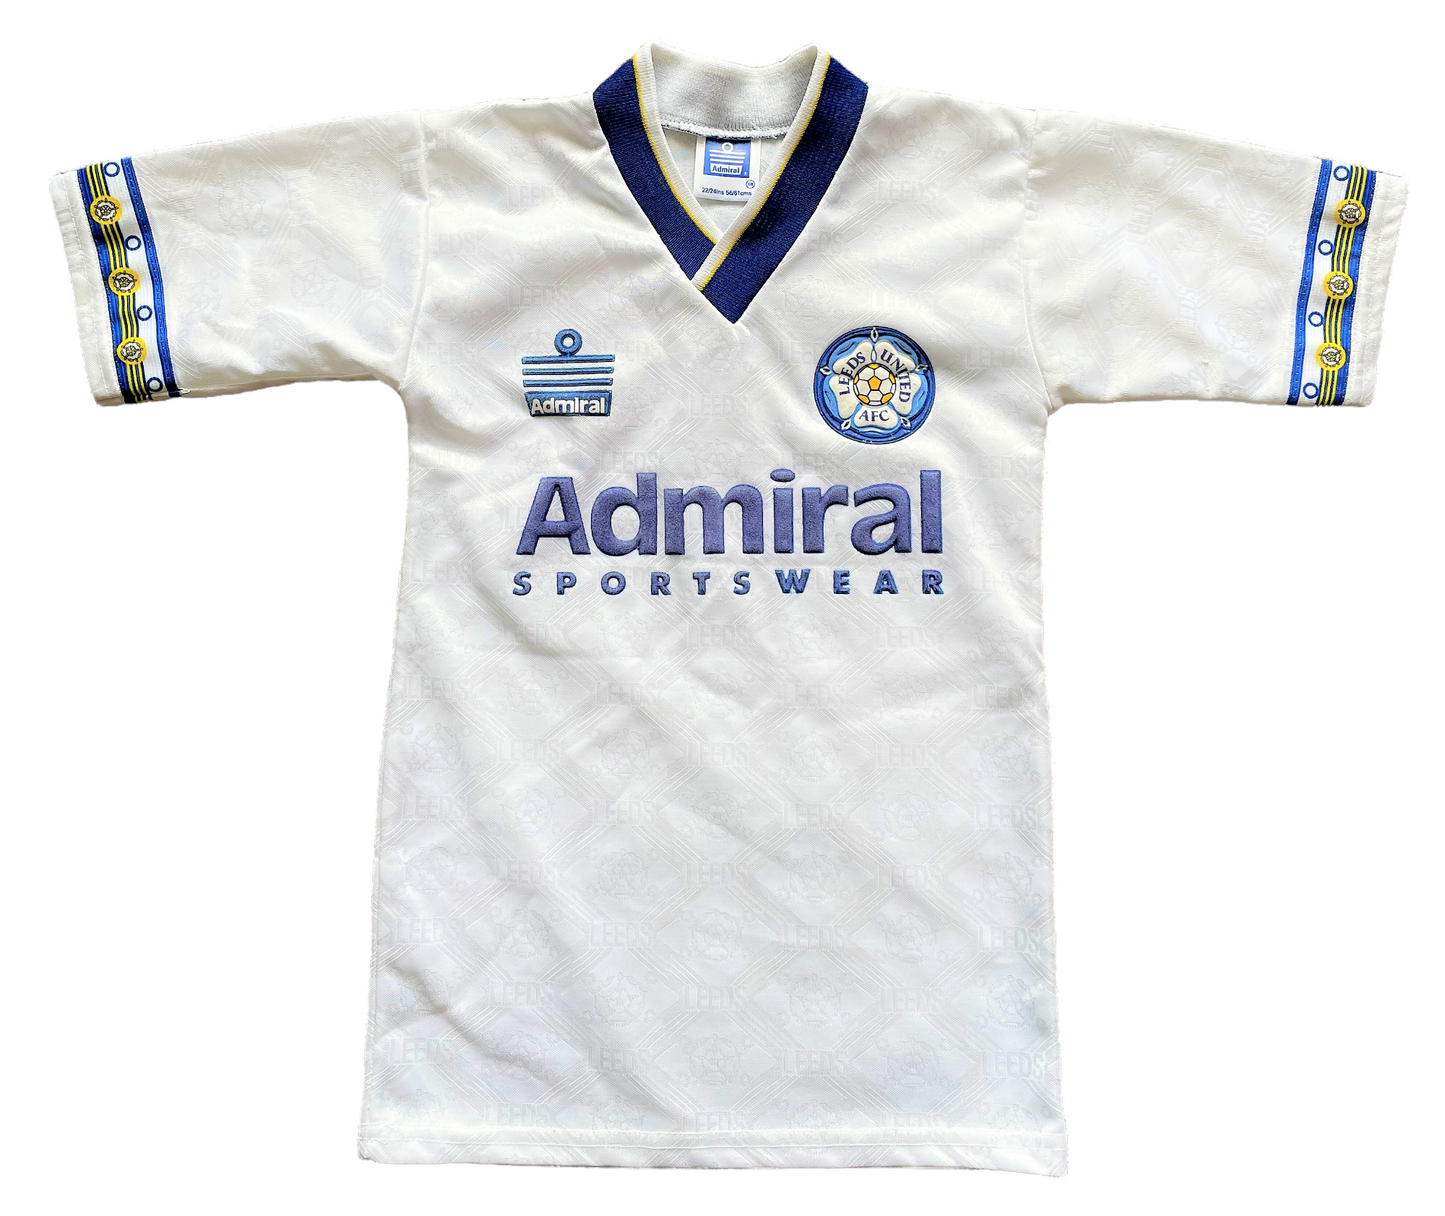 1992-93 Leeds United Home Shirt (excellent) Small Boys